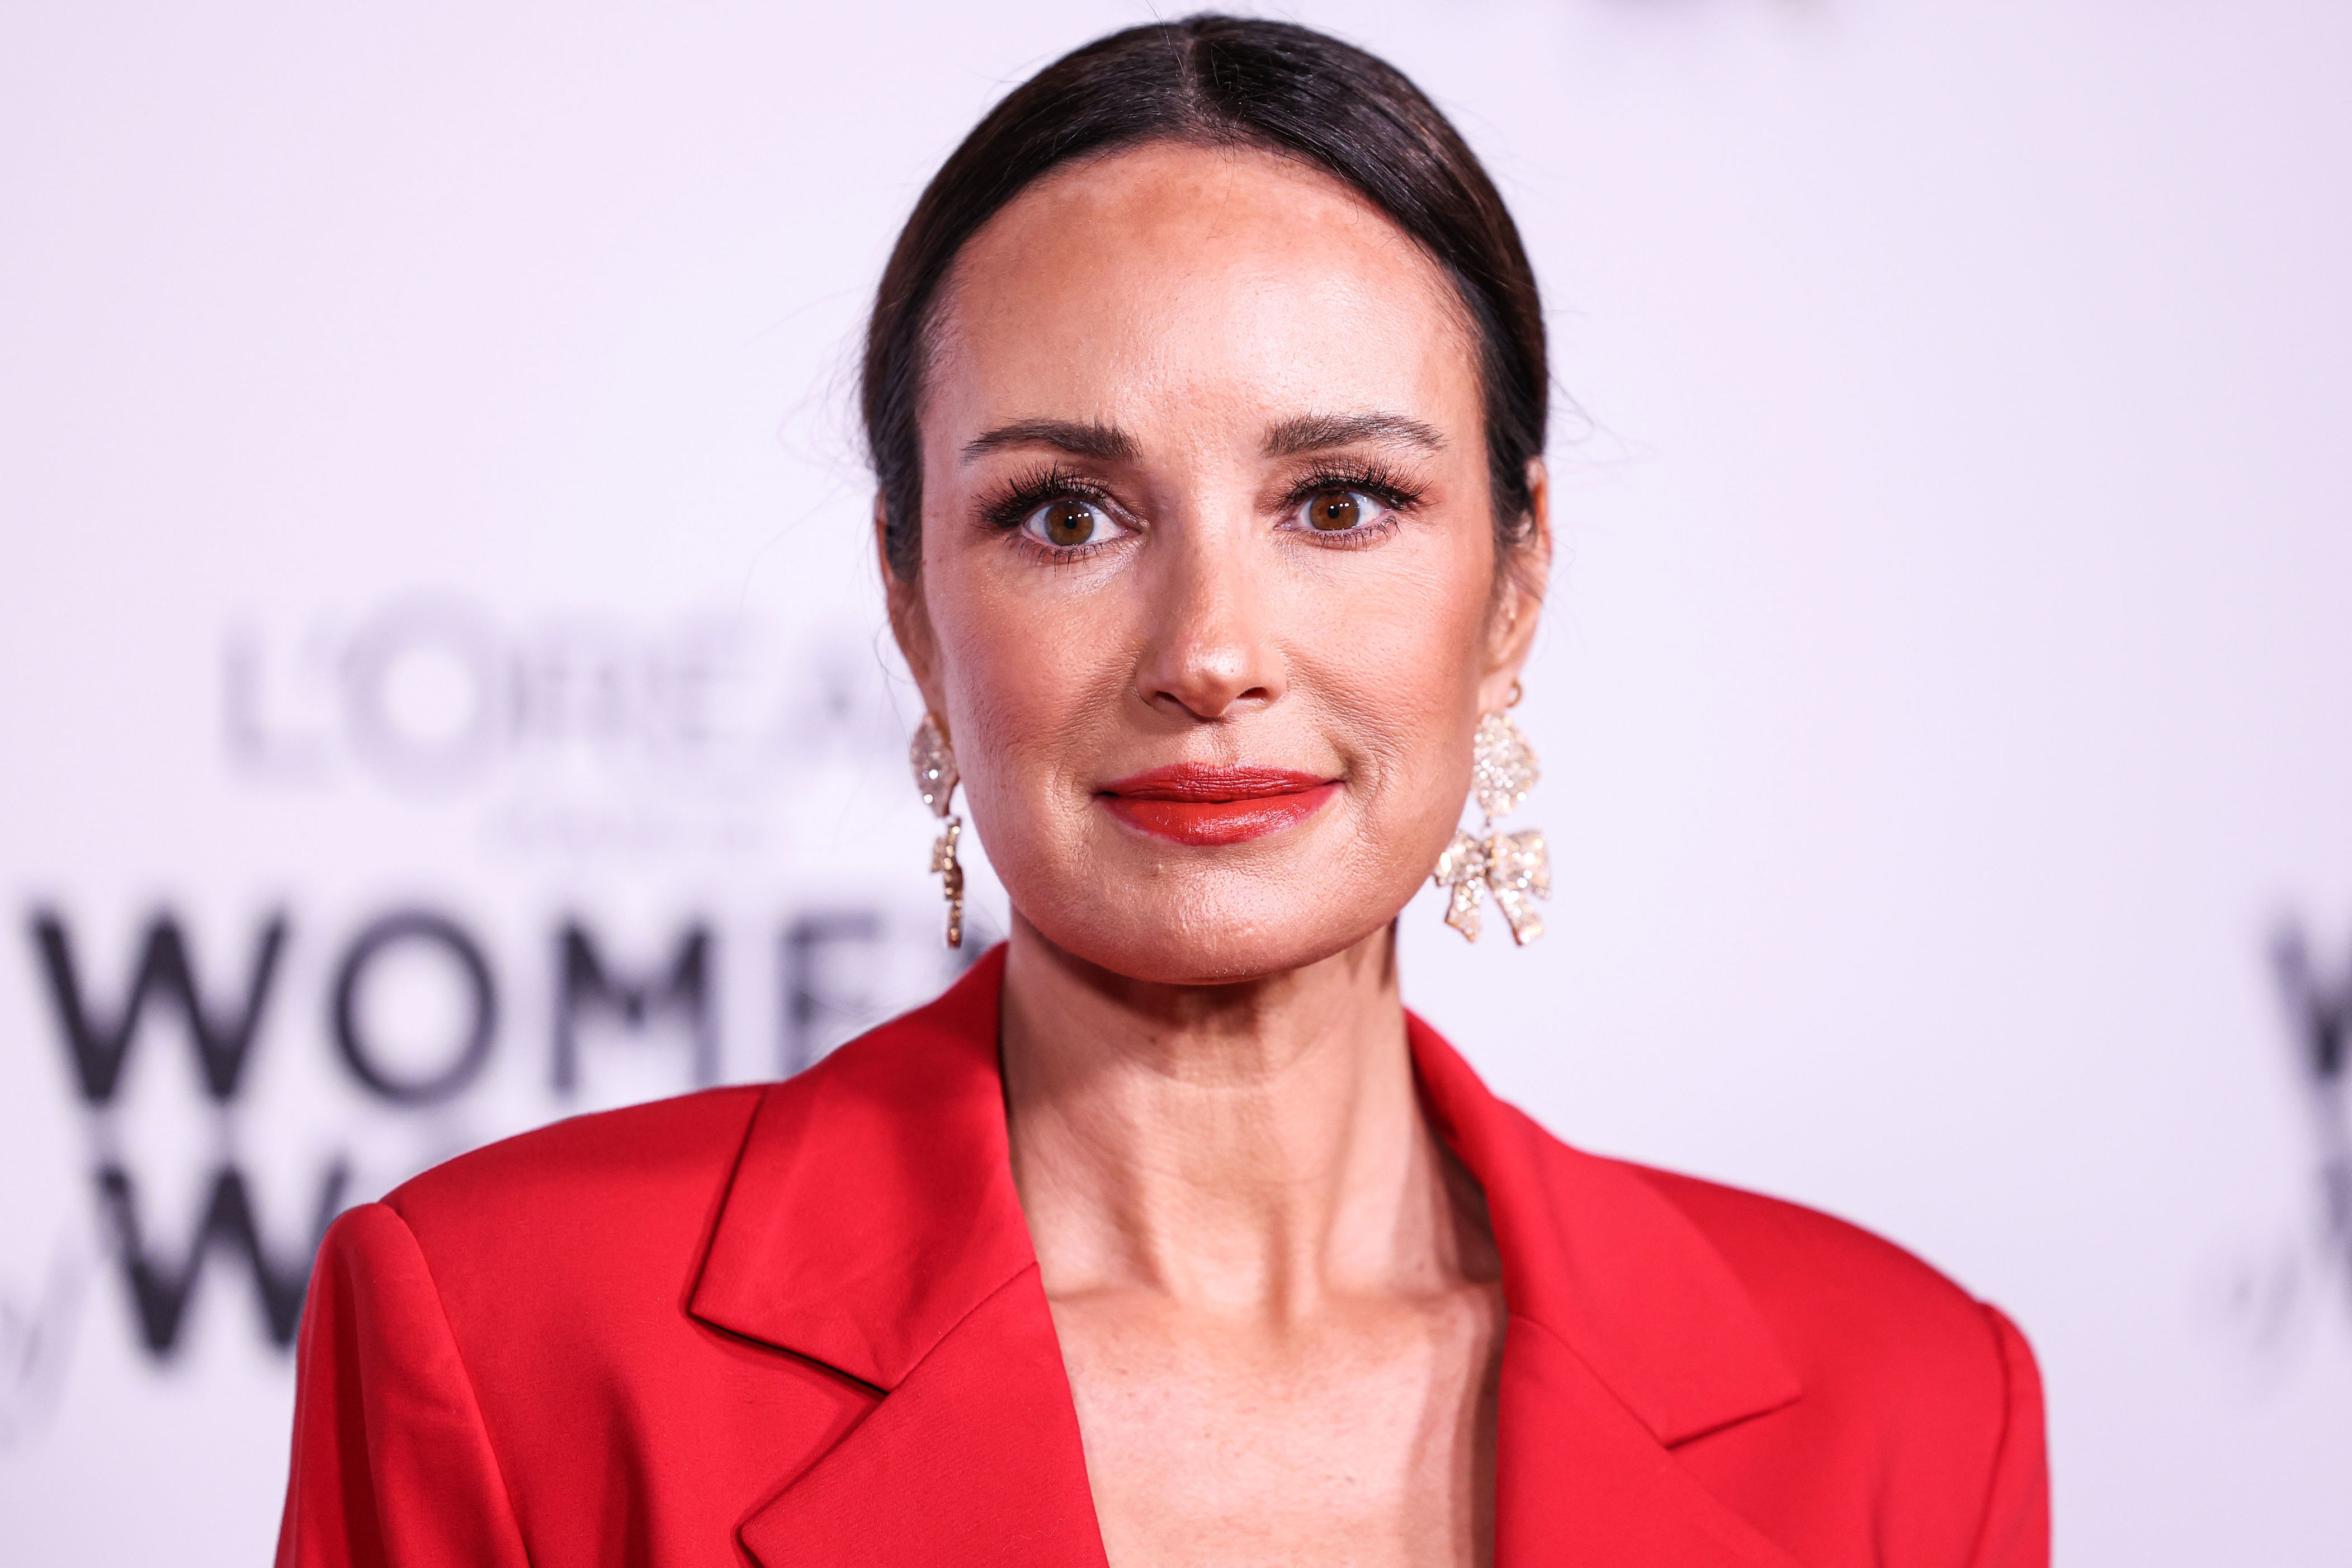 <p><span>Before she went under the knife for the first time ever in May 2023, former E! News host Catt Sadler -- seen here in December 2022 -- tried other procedures over the previous 13 years to give herself a little boost. "I've done injectables, I've done Botox and Xeomin, which is another injectable brand name that I love. I've done a little bit of filler over time. I didn't do Botox for the first time until I was 35, so this is all in the last decade-plus. I am such a fan of beauty treatments. I've also done microneedling. I even tried Morpheus," she told </span><a href="https://www.glamour.com/story/catt-sadler-facelift-neck-lift-blepharoplasty-age-48">Glamour</a><span>. </span></p><p>But in 2023, she decided she wanted to do more and consulted Beverly Hills plastic surgeon Steve Kim -- but her goal wasn't to change her appearance so she could get a job or so her boyfriend would think she looked younger, she explained. "It was more about looking in the mirror and feeling good. How I feel," she said. So she had a facelift, a neck lift and blepharoplasty -- surgery that removes excess skin from the eyelids -- at 48.</p><p>Keep reading to see the results nearly a month later...</p><p>MORE: <a href="http://www.wonderwall.com/eye-candy/best-celebrity-bodies/celeb-weight-loss-revealed-31783.gallery">Celeb weight loss transformations revealed</a></p>